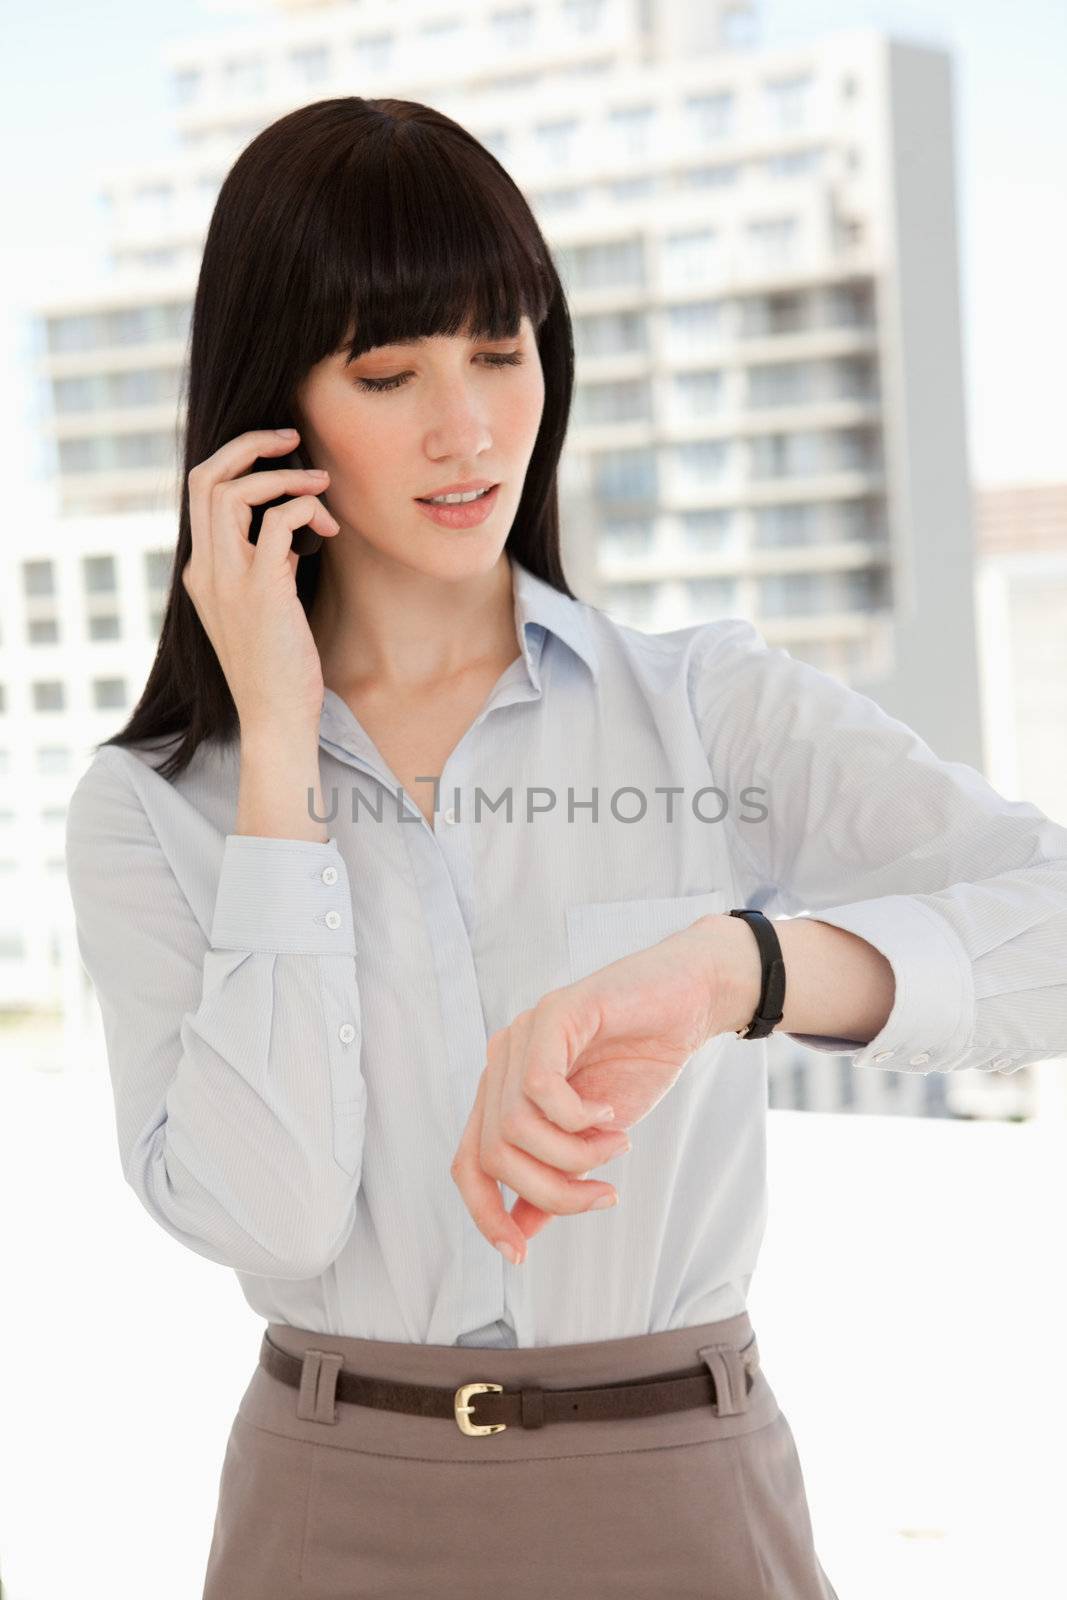 A woman checking the time as she makes a phone call